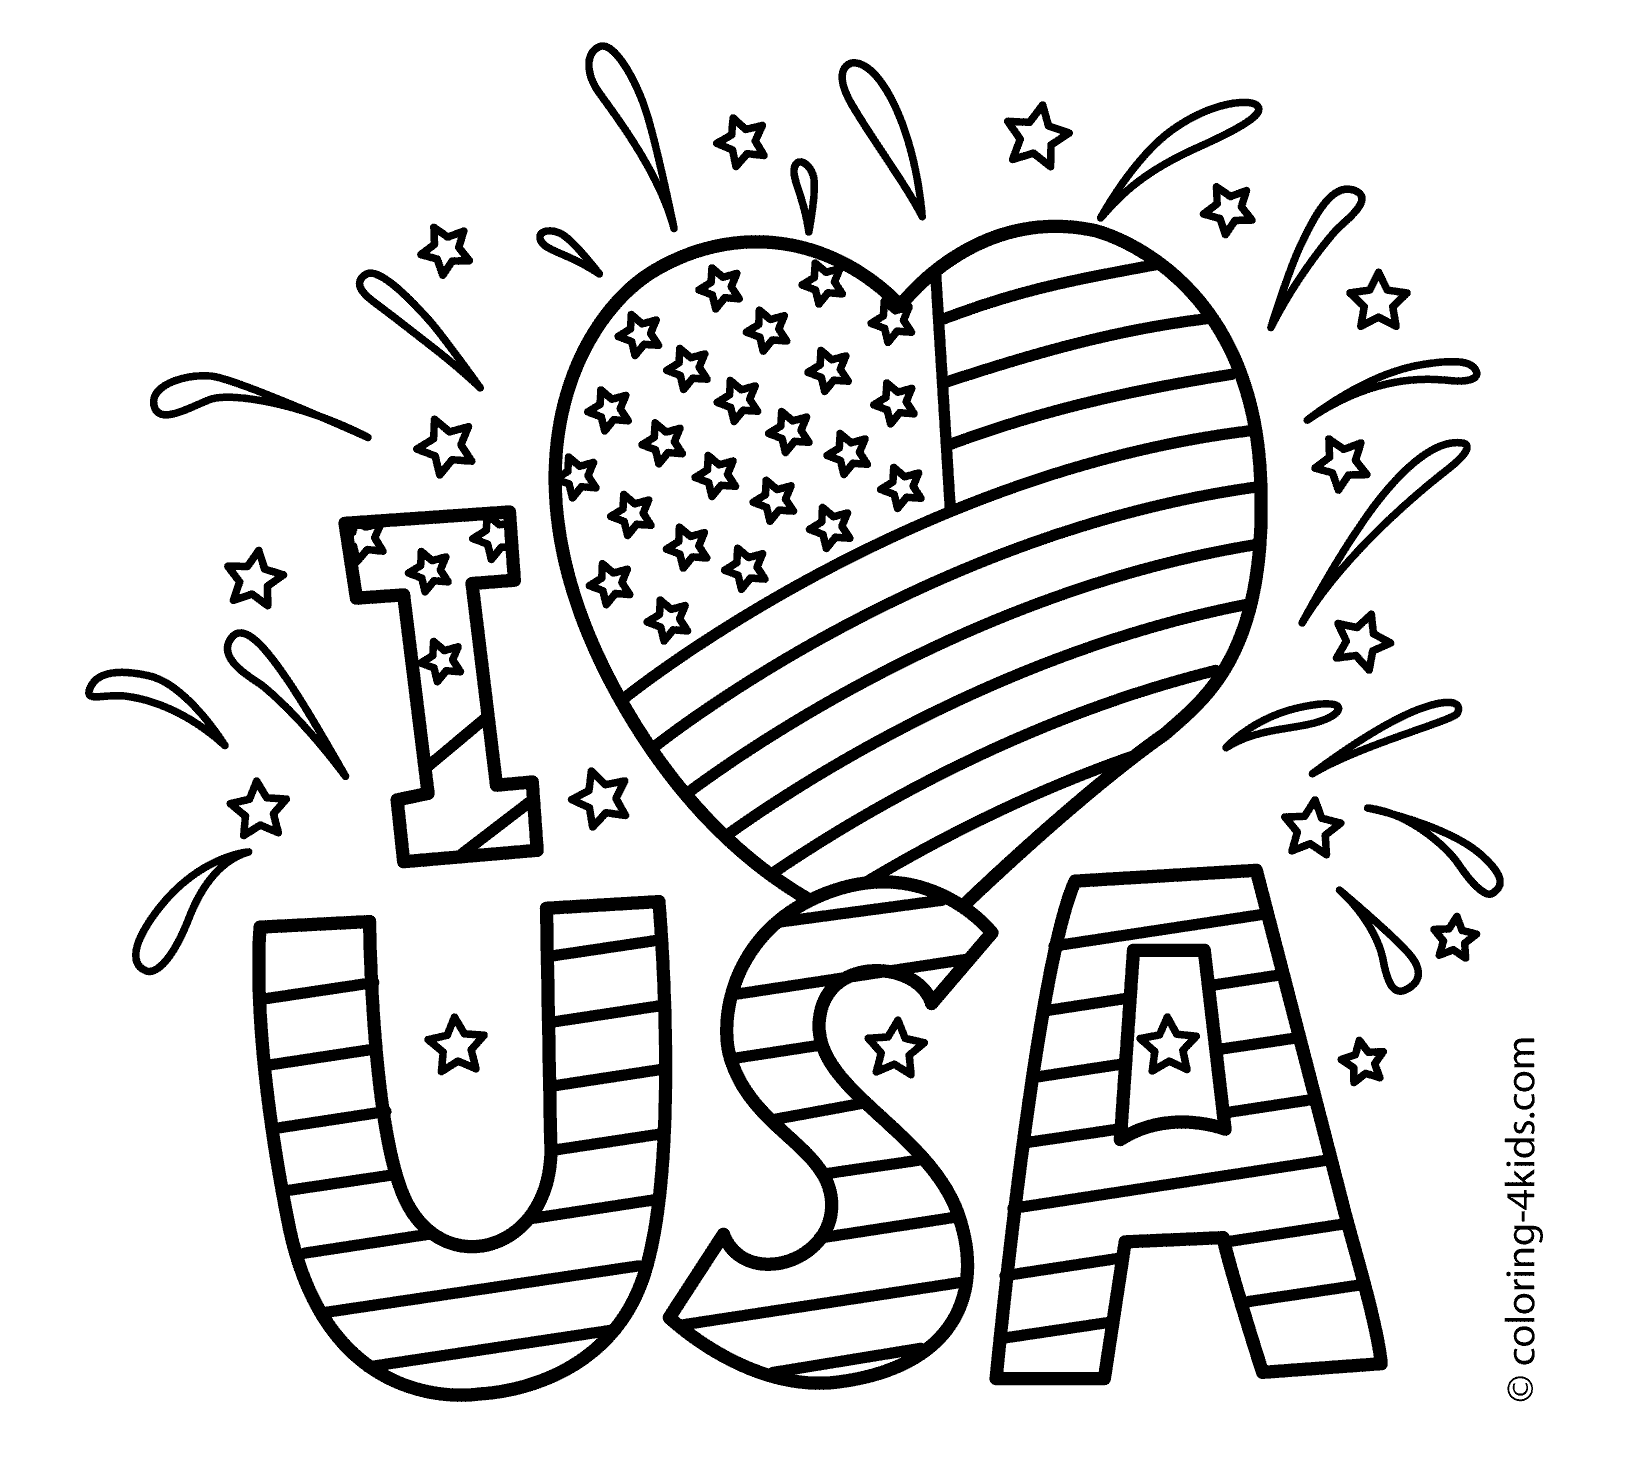 Usa coloring pages to download and print for free